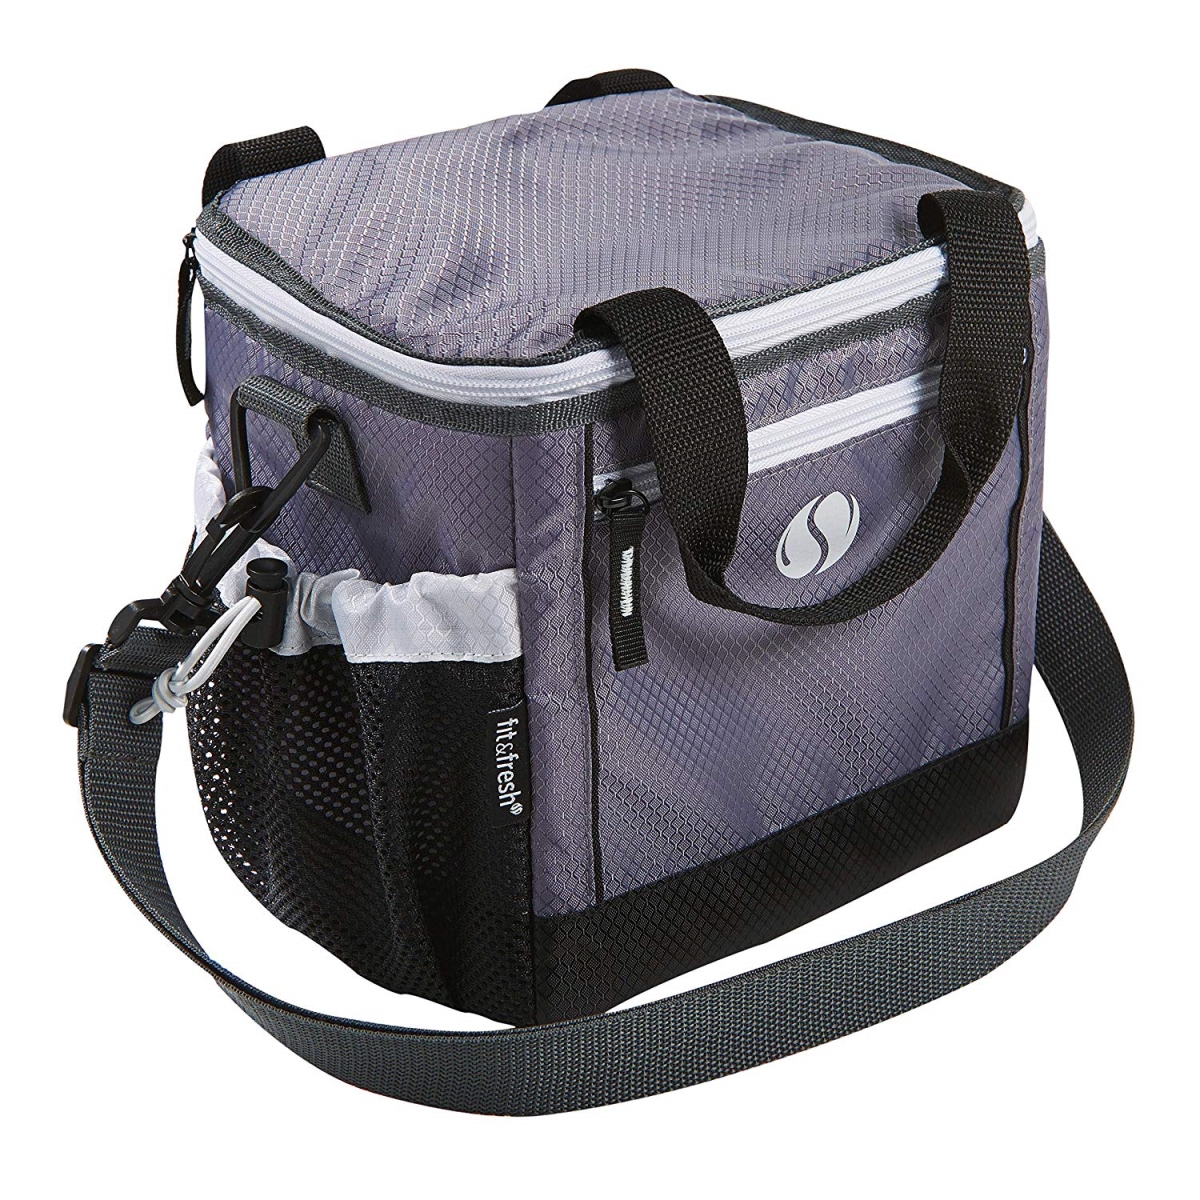 370khas2240 Fit & Fresh Multi Colored Official My Little Pony Bag In Gray With Black Trim